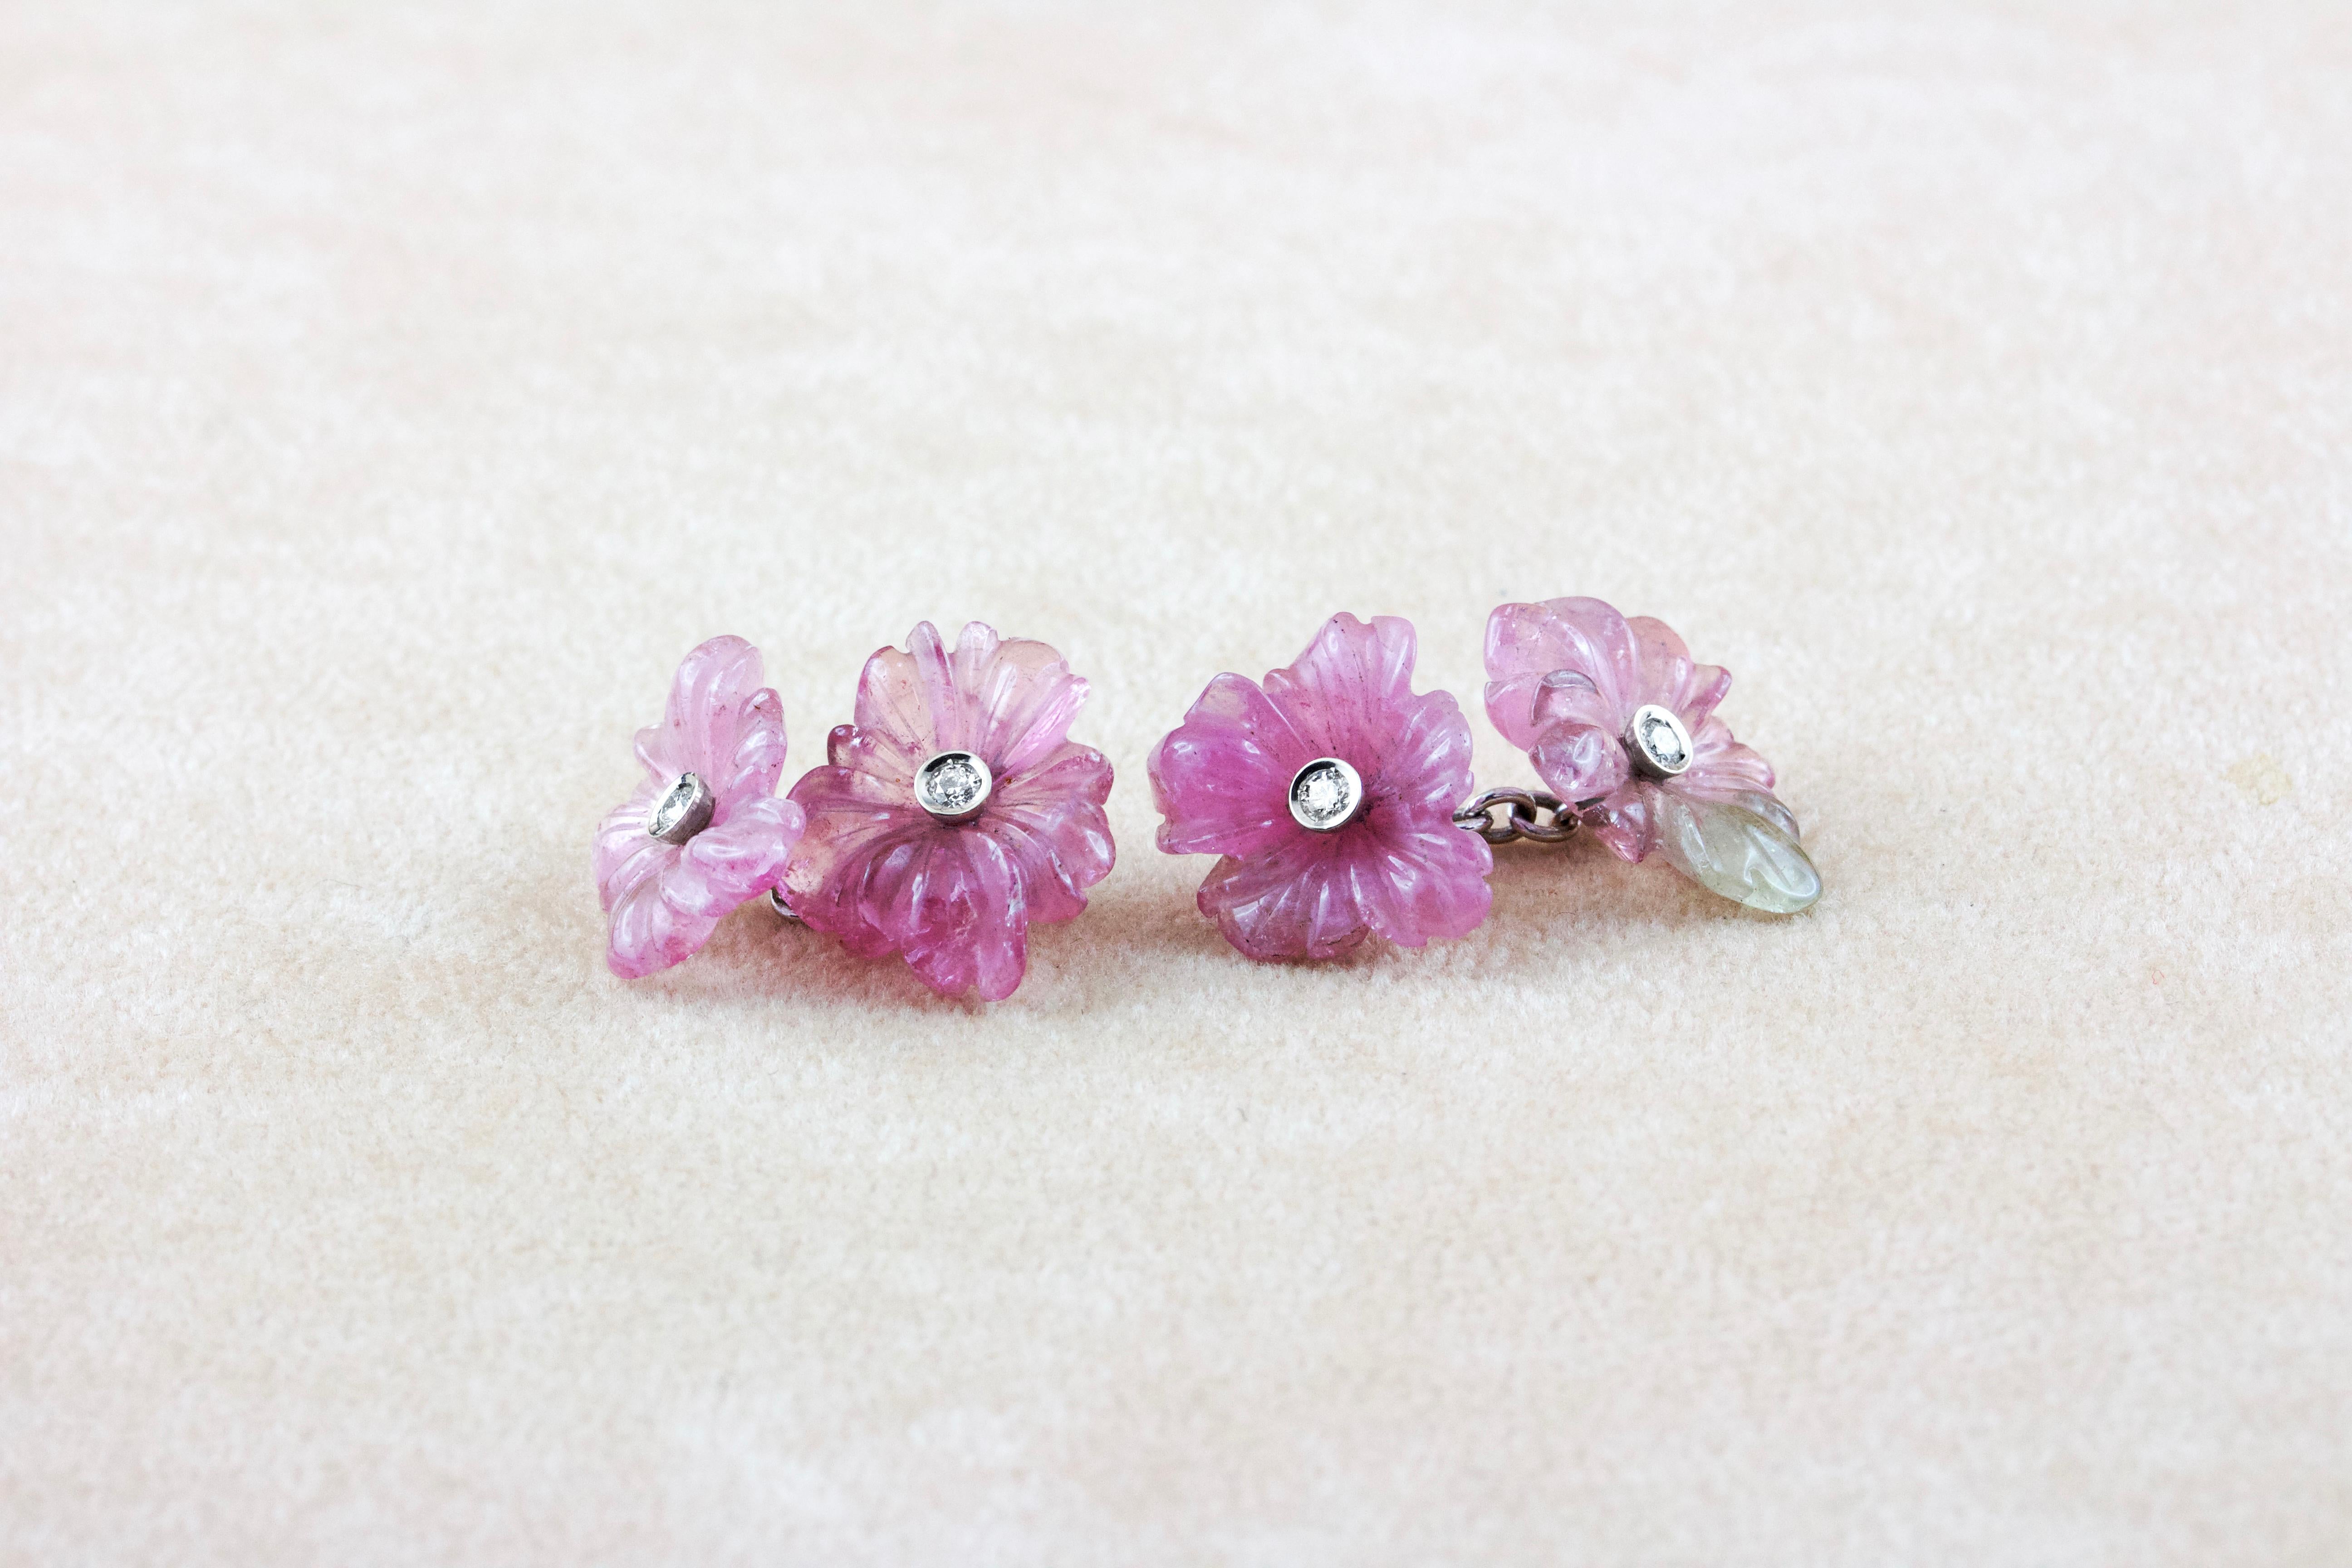 Charming and romantic, this pair of cufflinks is made of  tourmaline stones that evoke the delicate scene of a garden. 
Both front face and toggle are shaped as flowers, and the use of different silhouettes create a precious, one-of-a-kind effect.